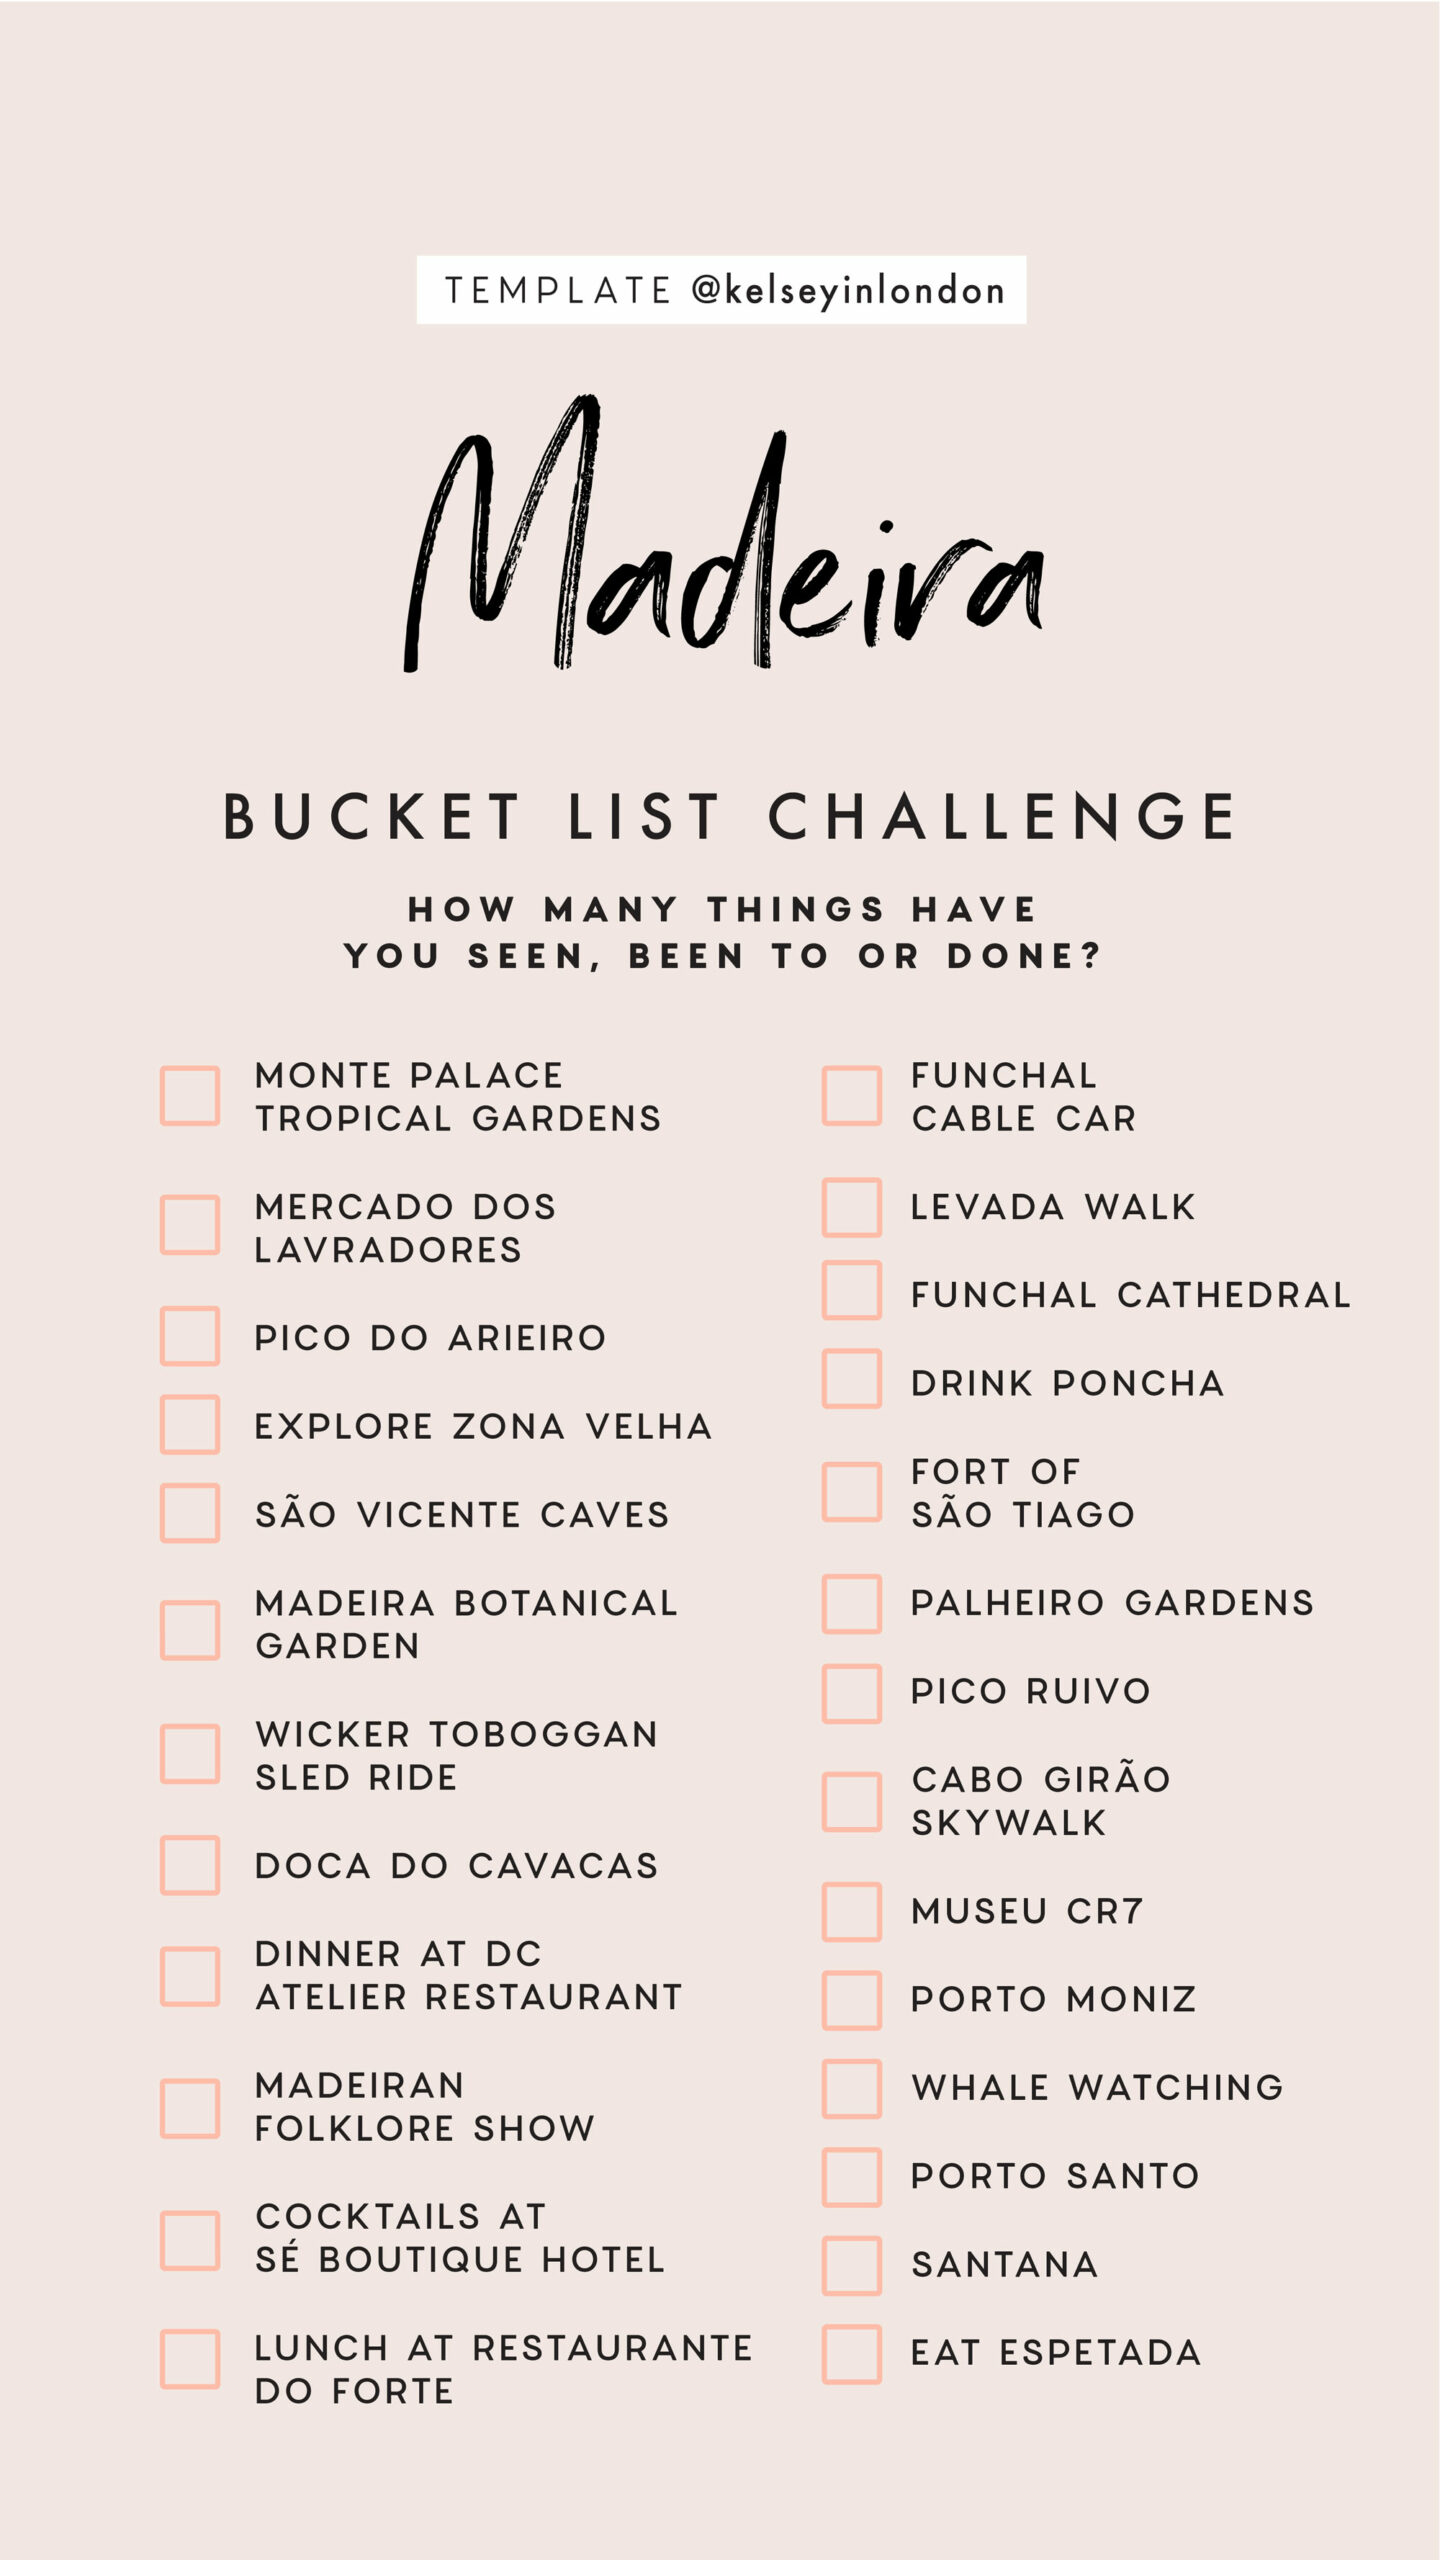 10-Top-things-to-do-in-madeira-Bucket-list--Instagram-Story-Template--kelseyinlondon-Kelsey-Heinrichs--What-to-do-in-madeira--Where-to-go-in-madeira-top-places-in-madeira-